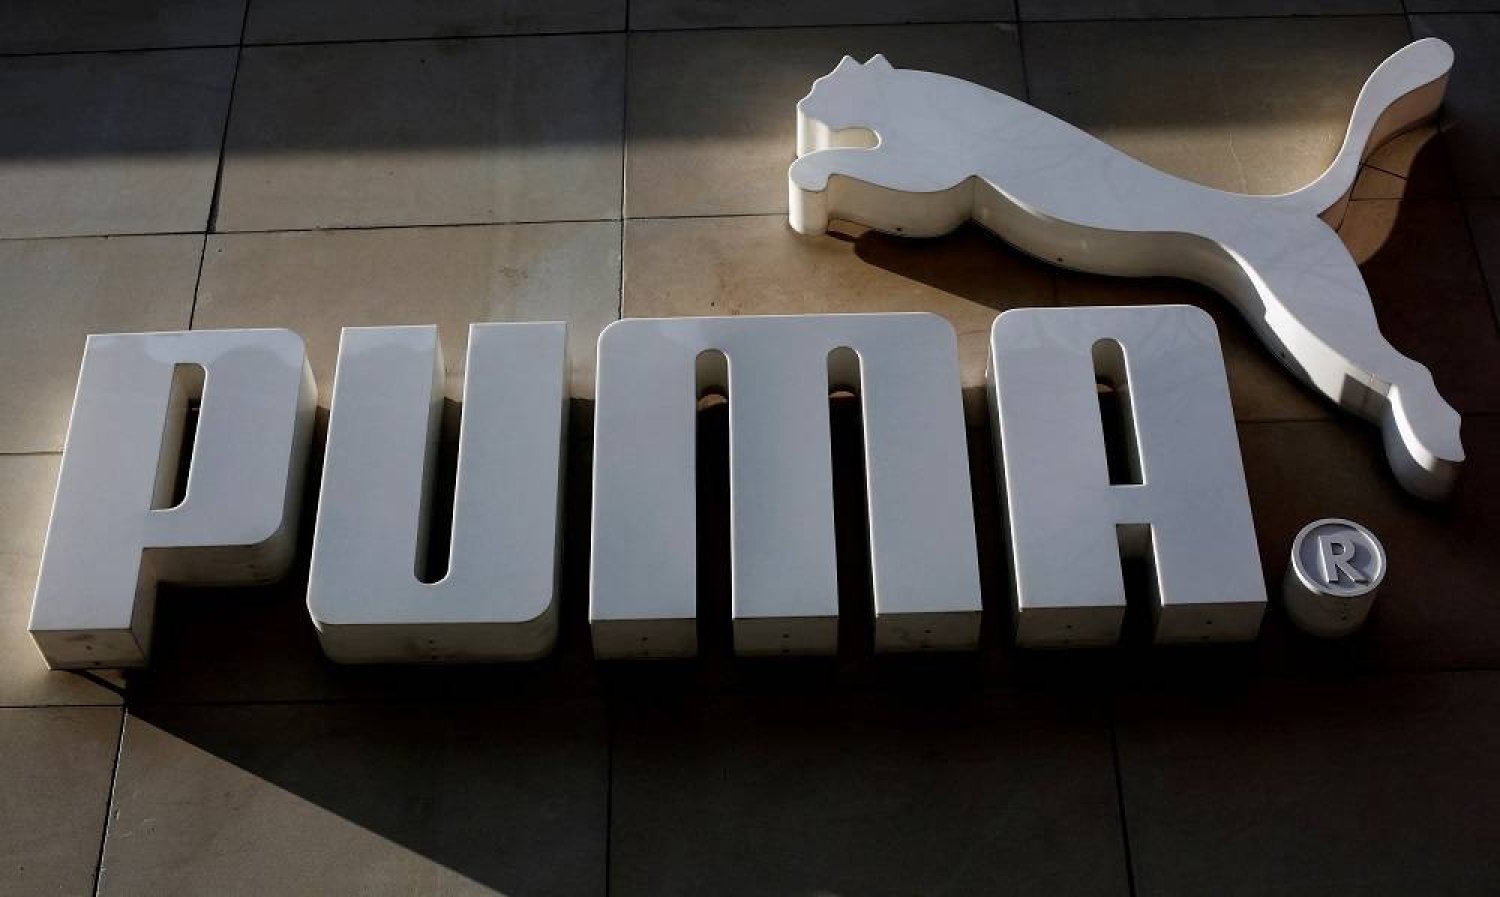 The logo of German sports goods firm Puma is seen at the entrance of one of its stores in Vienna, Austria, March 18, 2016. (Reuters)